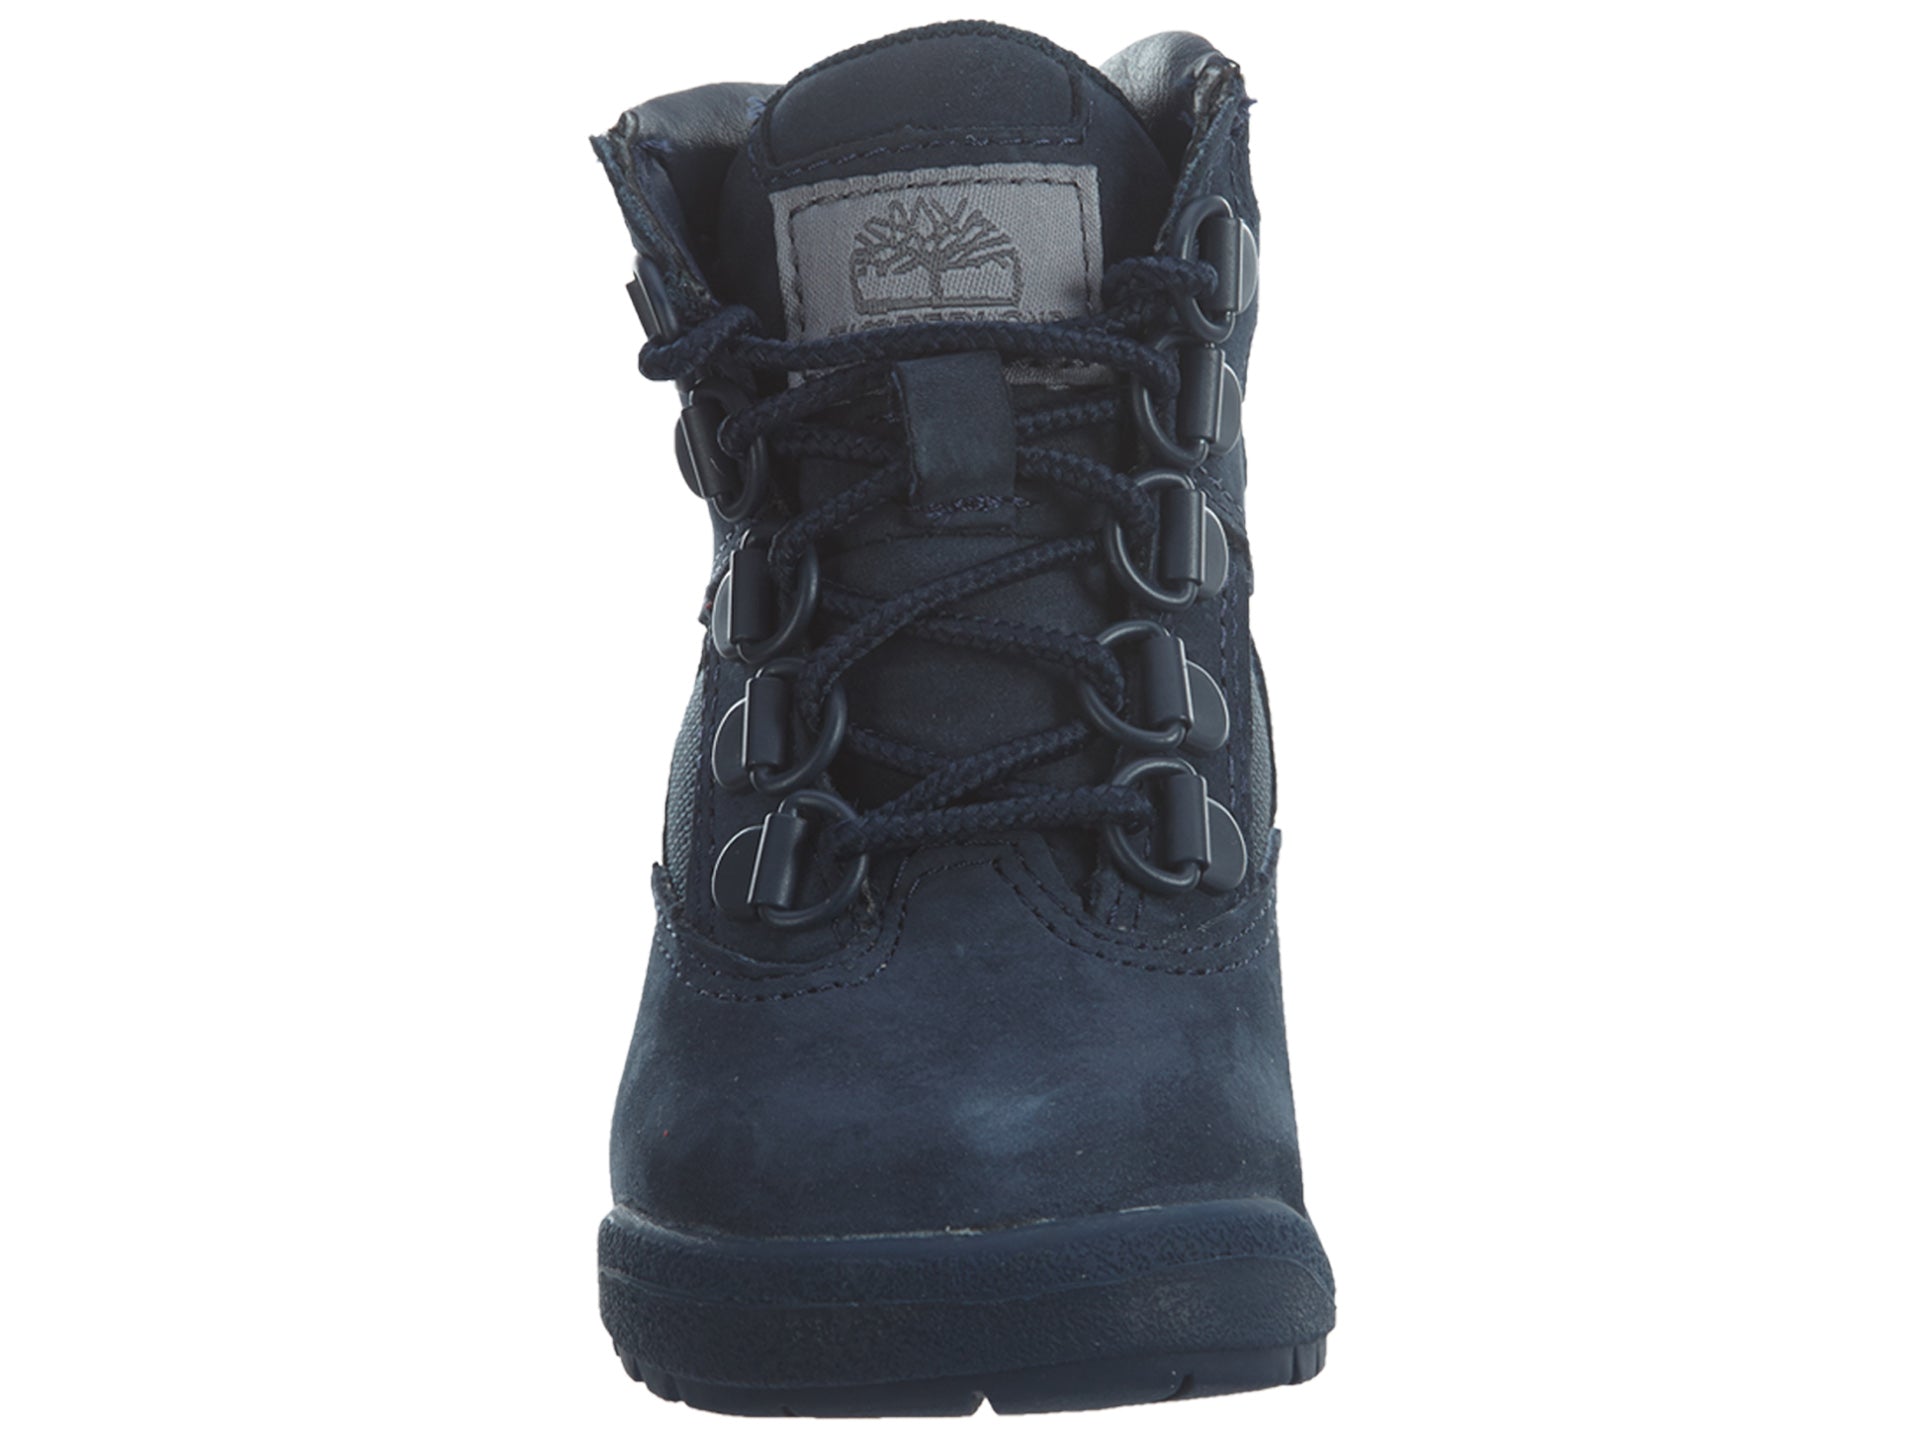 Timberland 6" Field Boots Toddlers Style : Tb0a1hf1